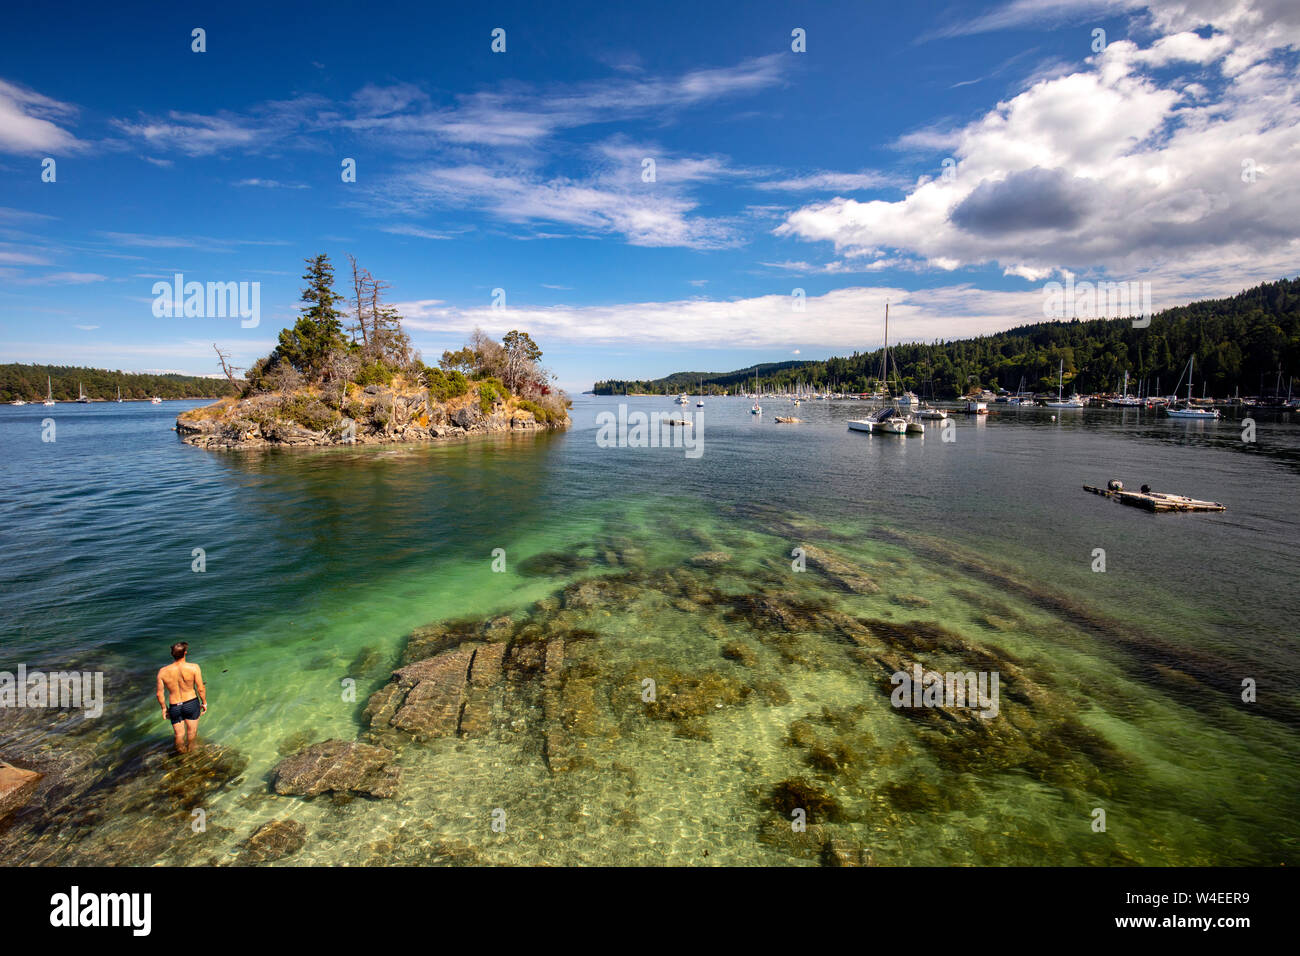 Person swimming near Grace Islet in Ganges Harbour - Salt Spring Island, British Columbia, Canada Stock Photo